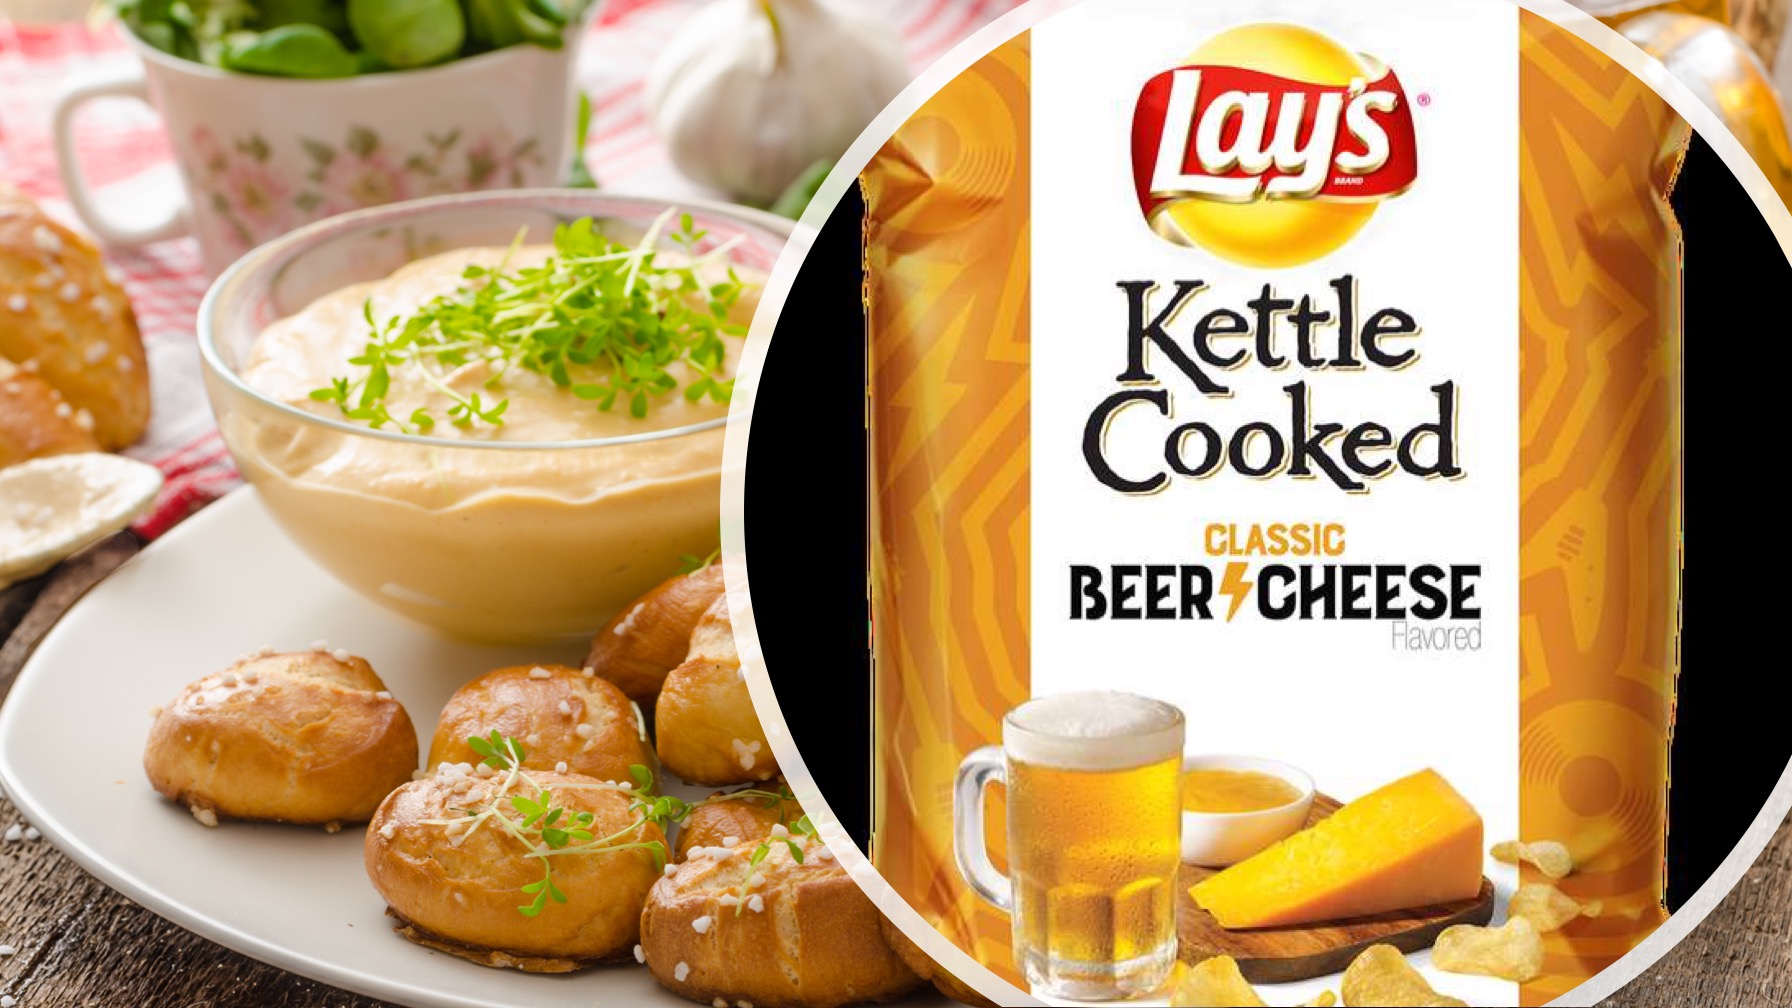 Lay's Beer Cheese Chips Will Pair Perfectly With Beer